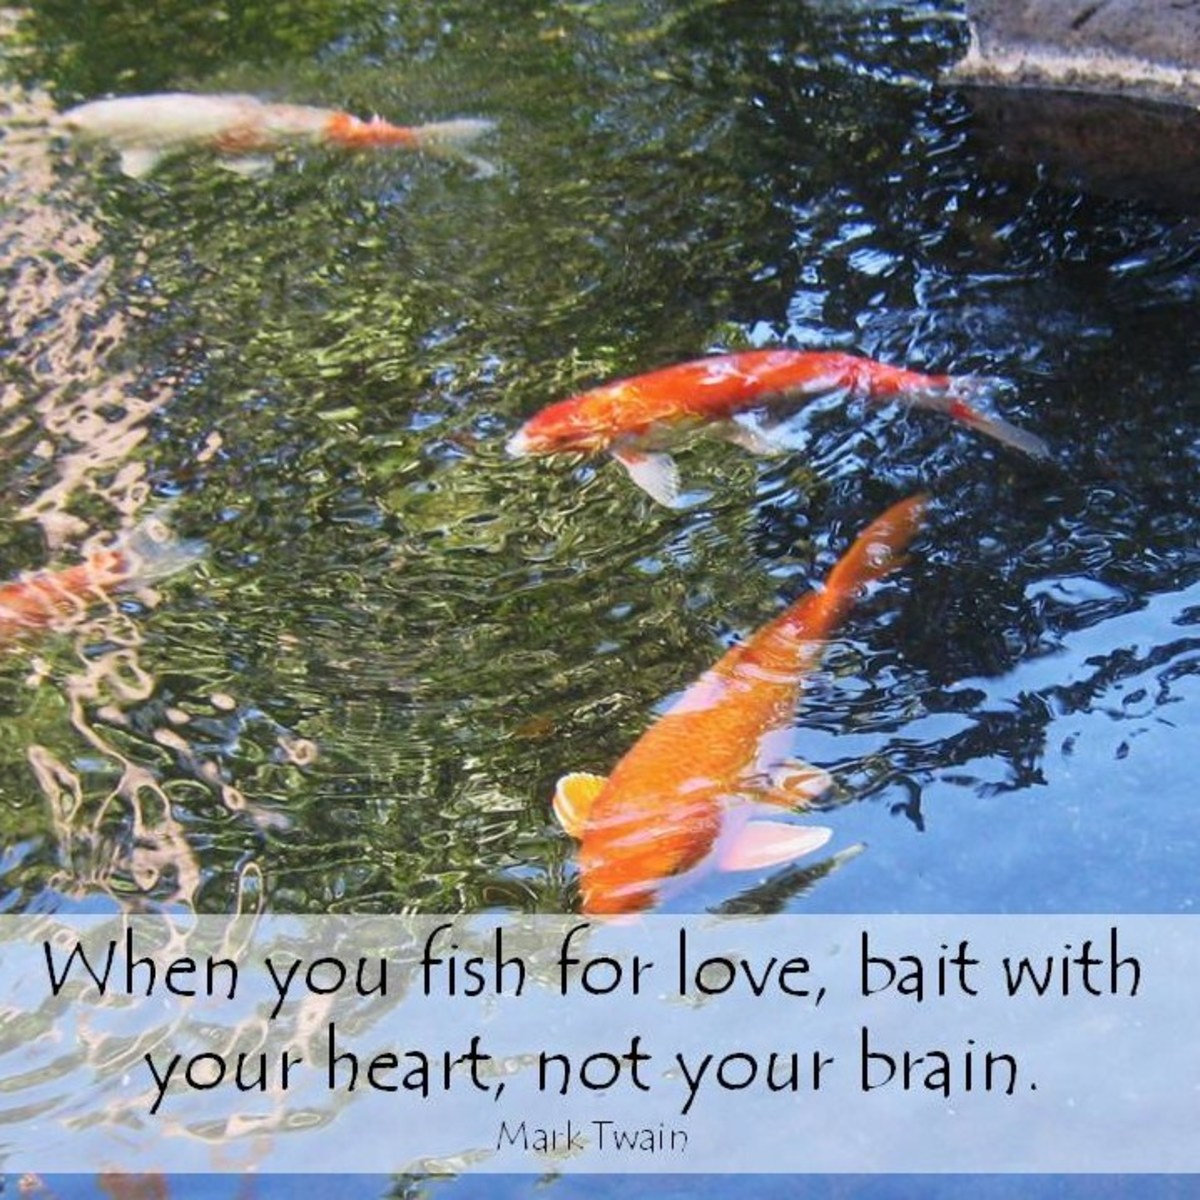 Sharing a romantic quote with your spouse is one way to say 'I love you!'